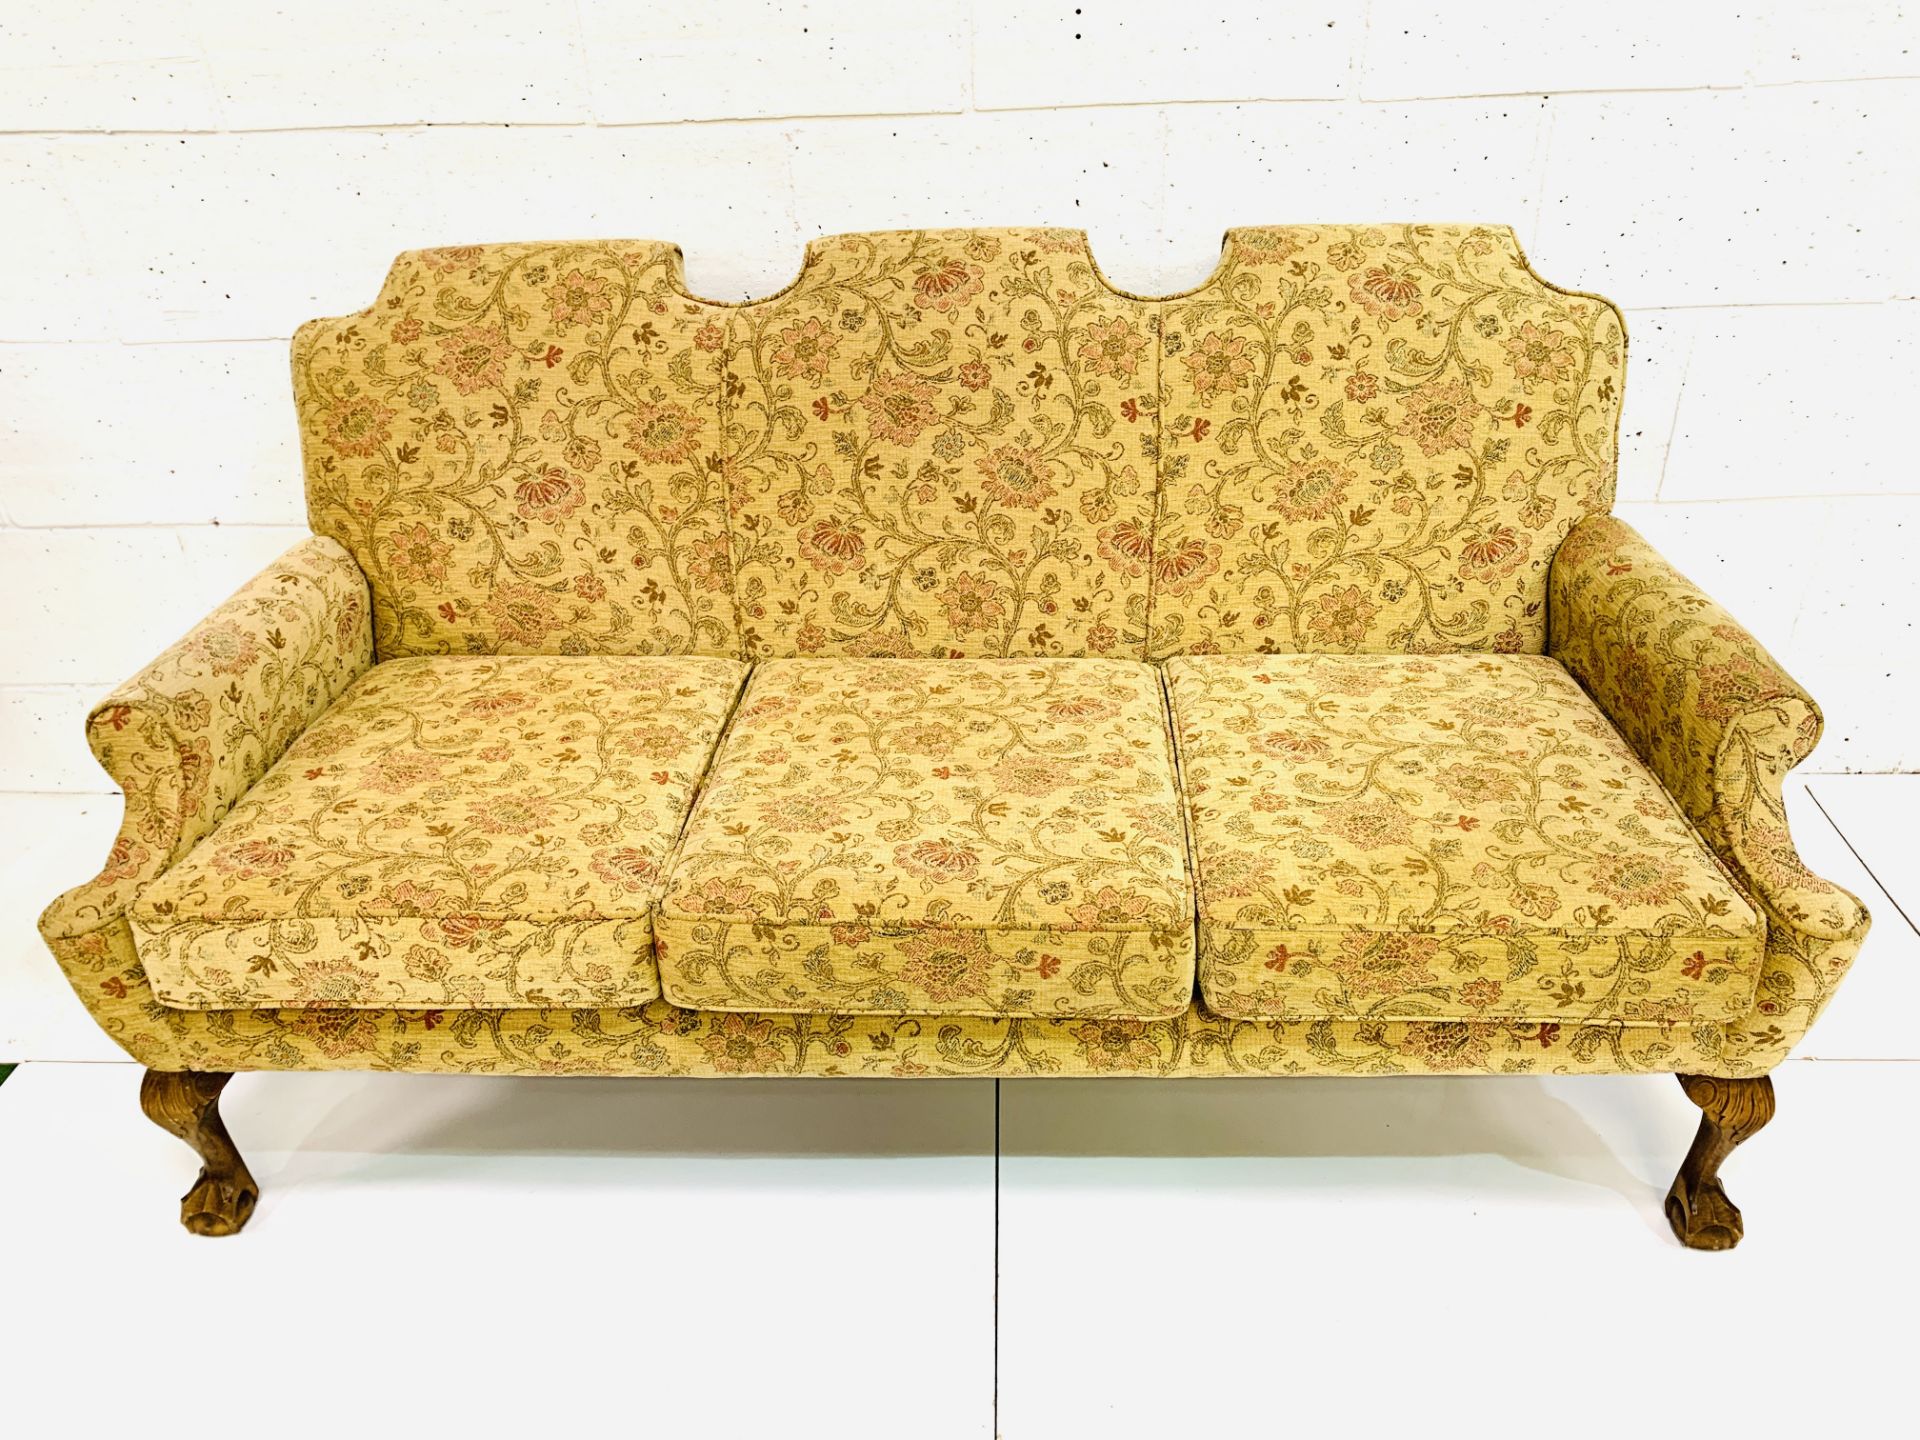 Queen Anne style settee - Image 3 of 5